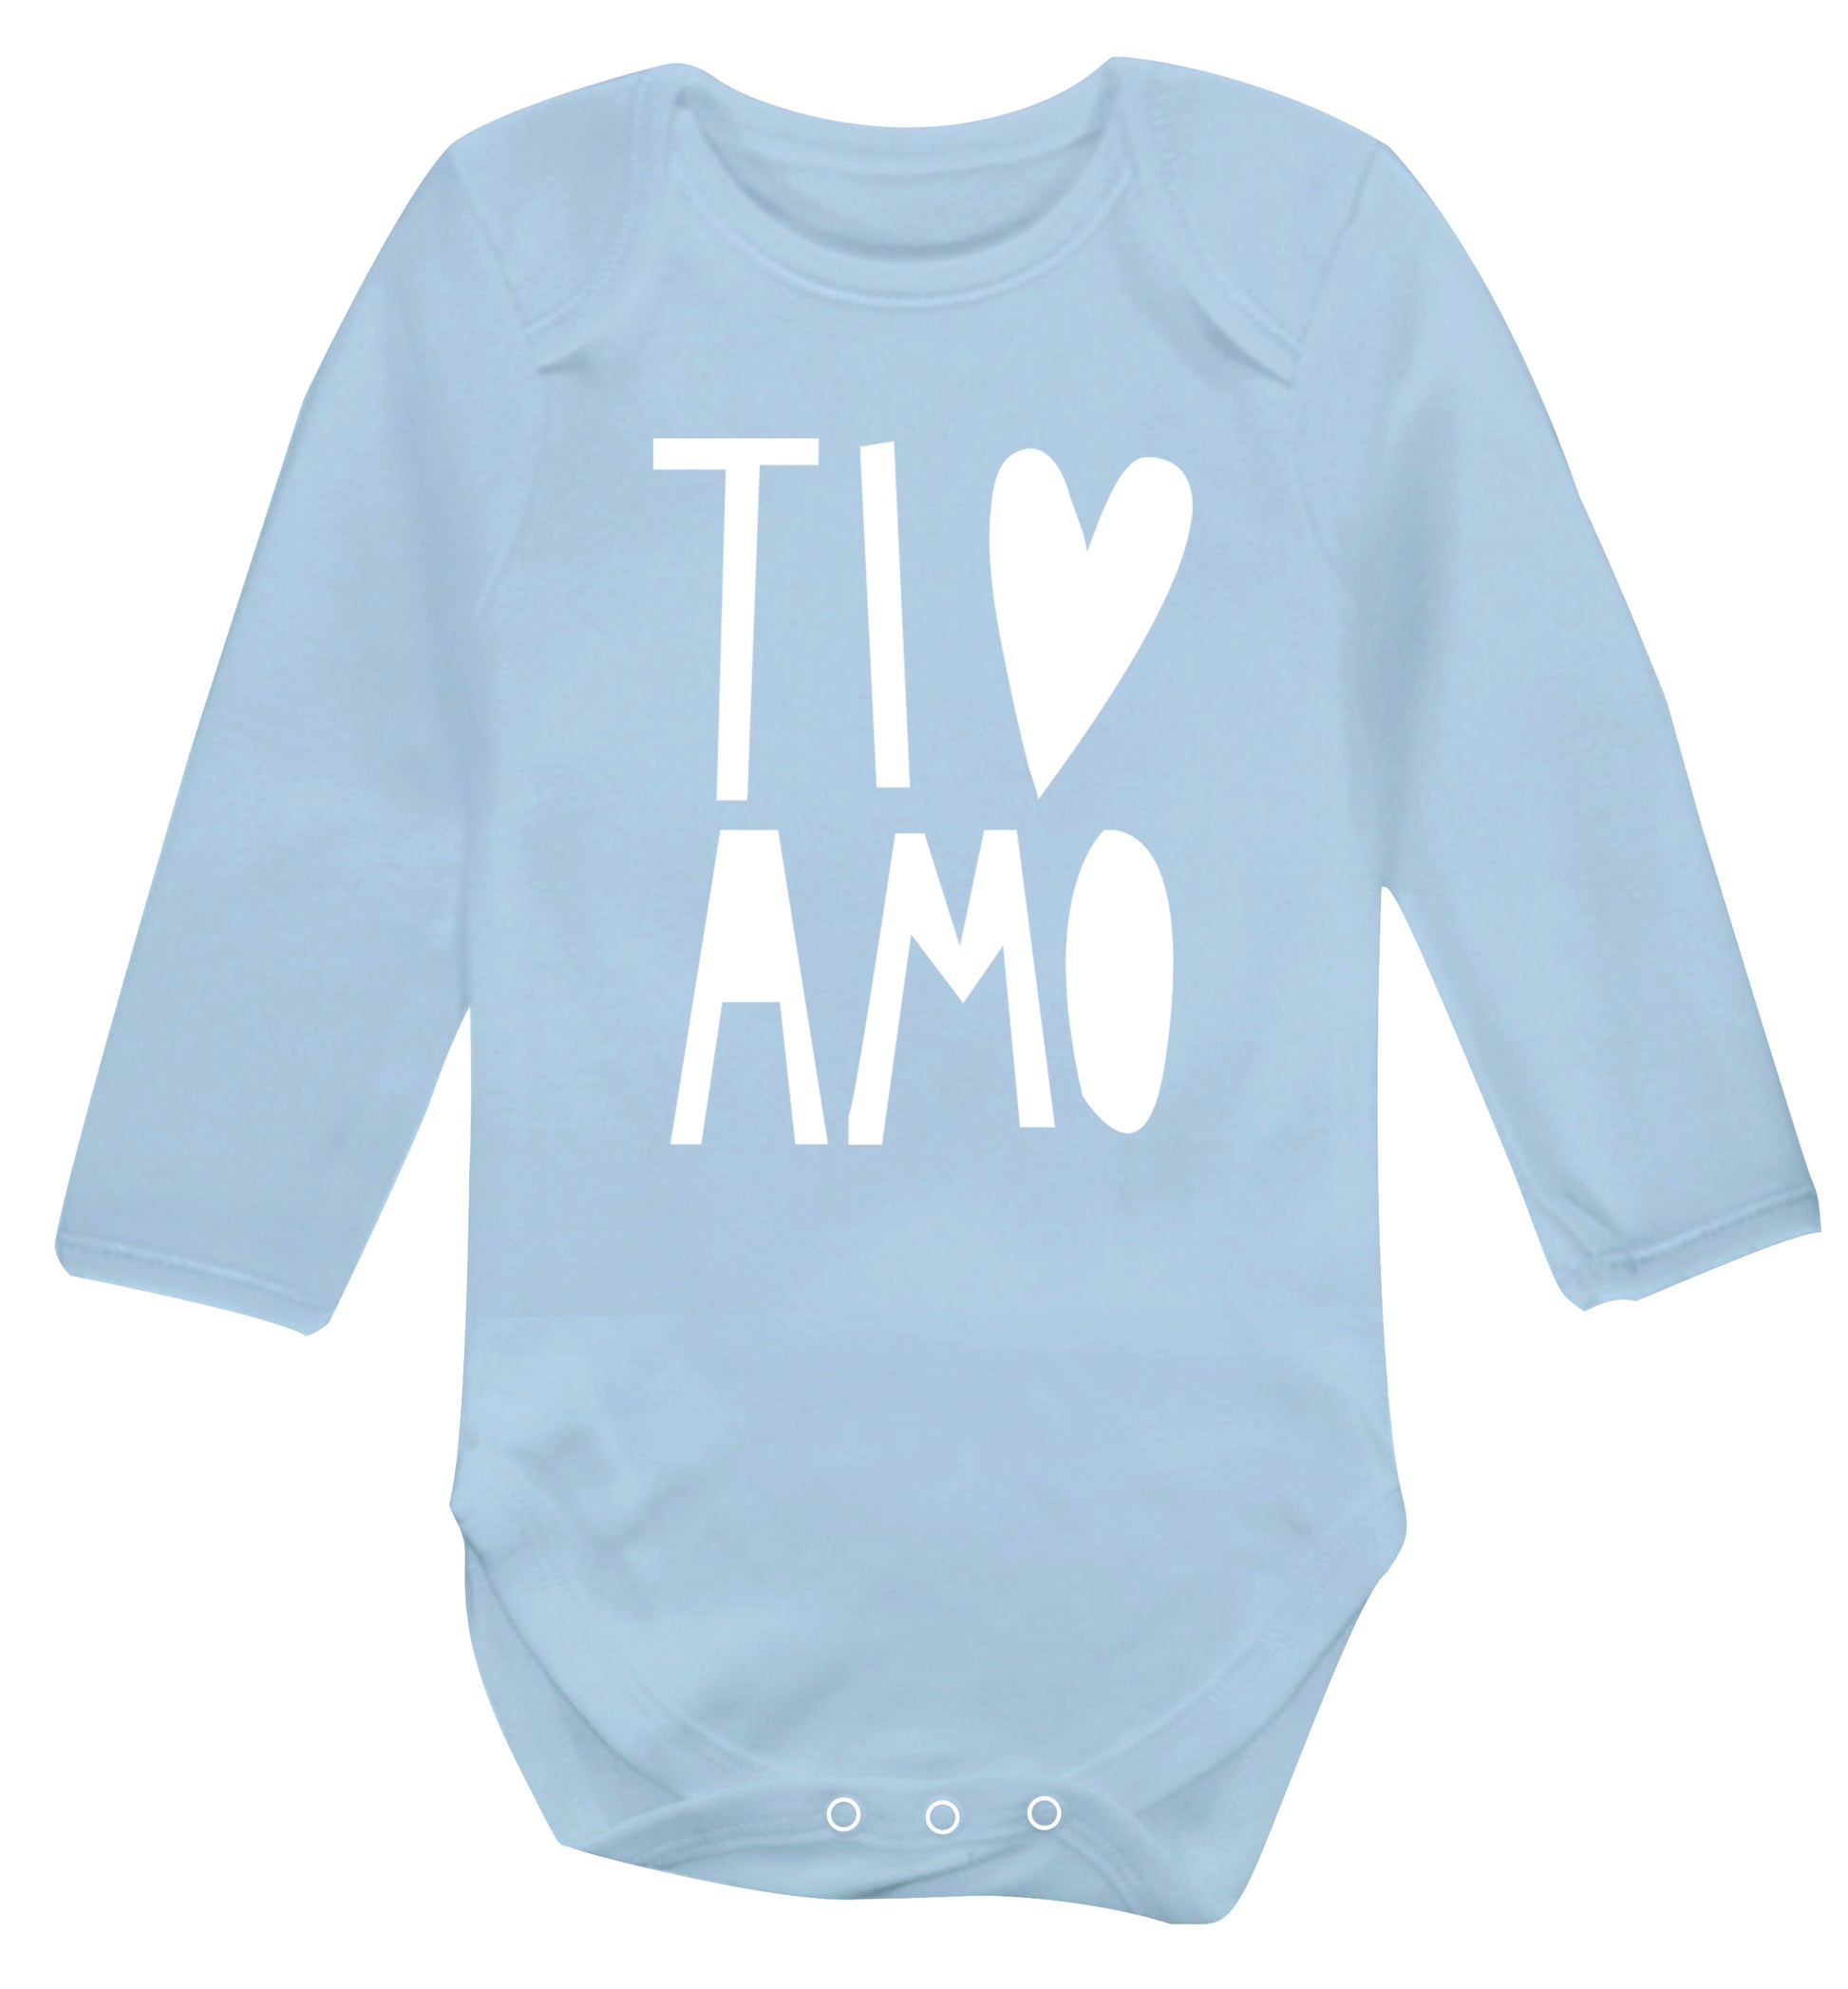 Ti amo - I love you Baby Vest long sleeved pale blue 6-12 months